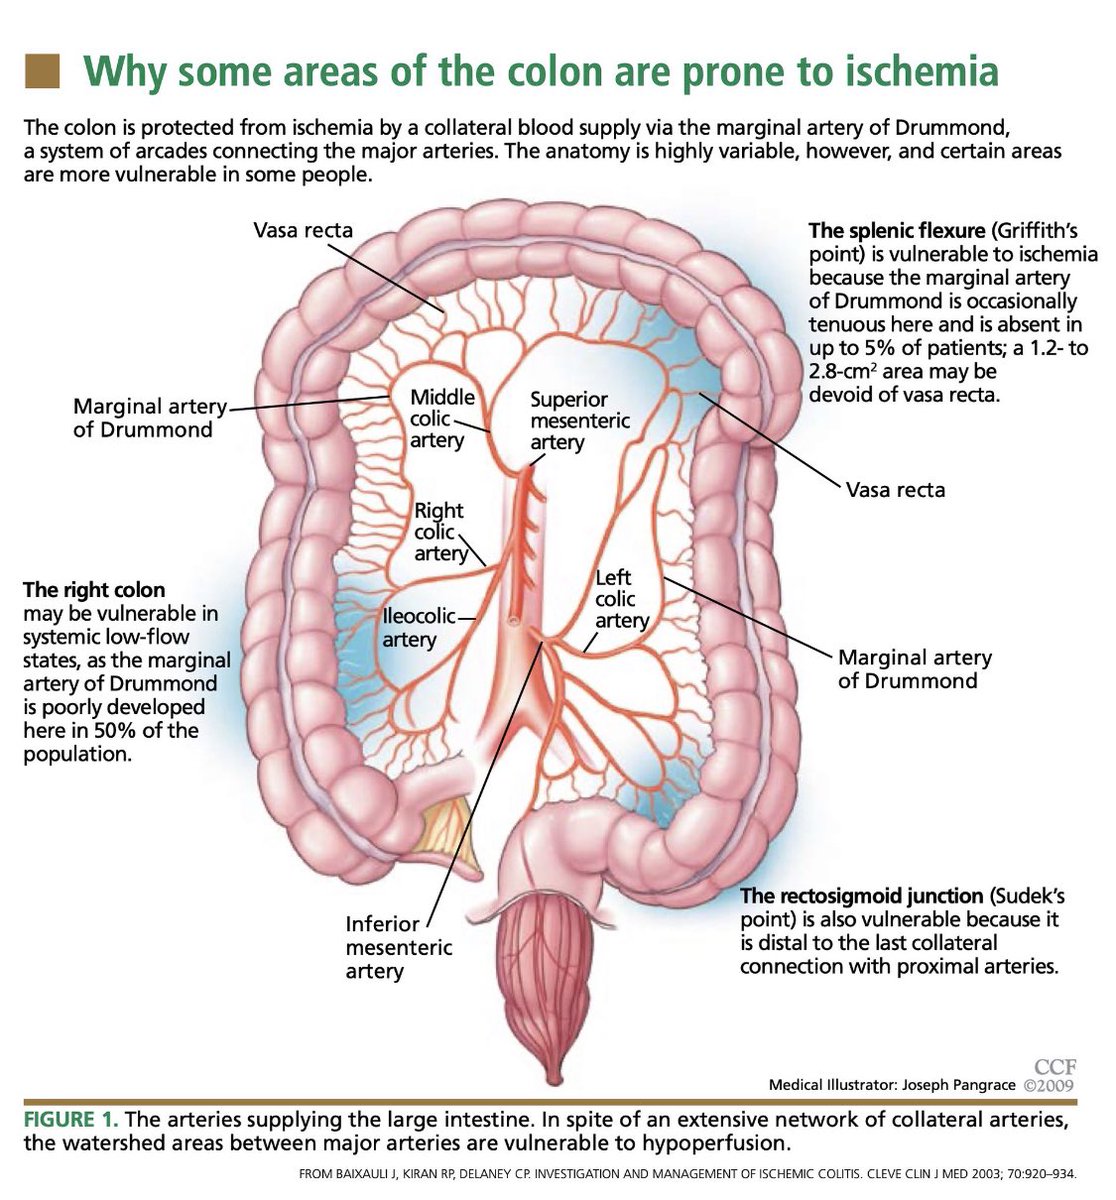 Some parts of the colon are prone to 
 ischemia…